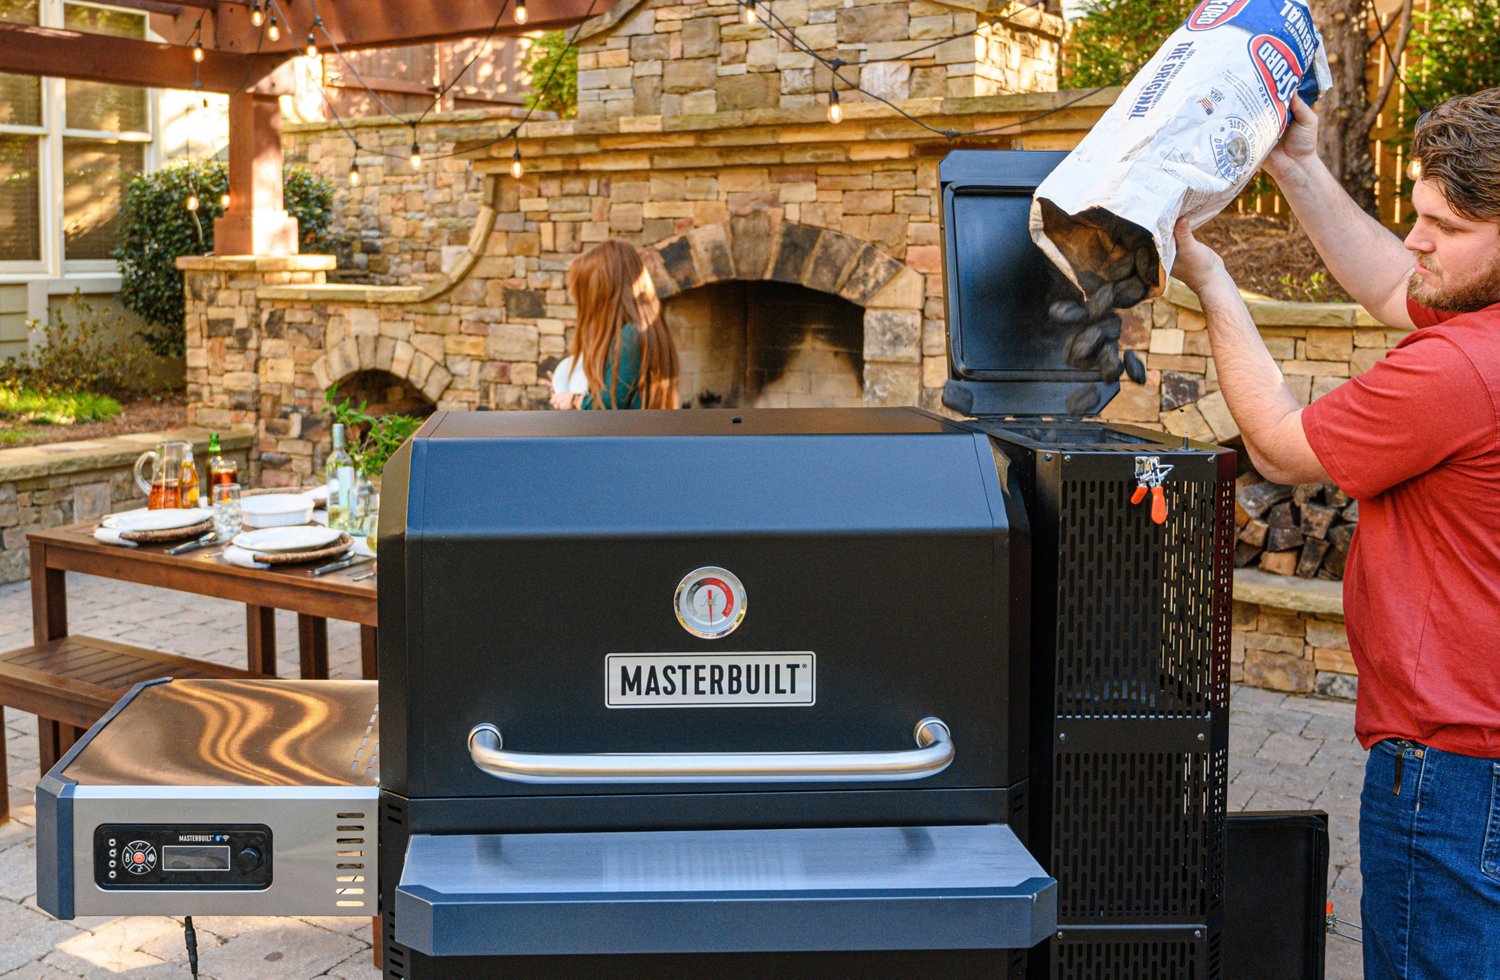 Masterbuilt Gravity Series 1050 Digital Charcoal Grill and Smoker                                                                - view number 4